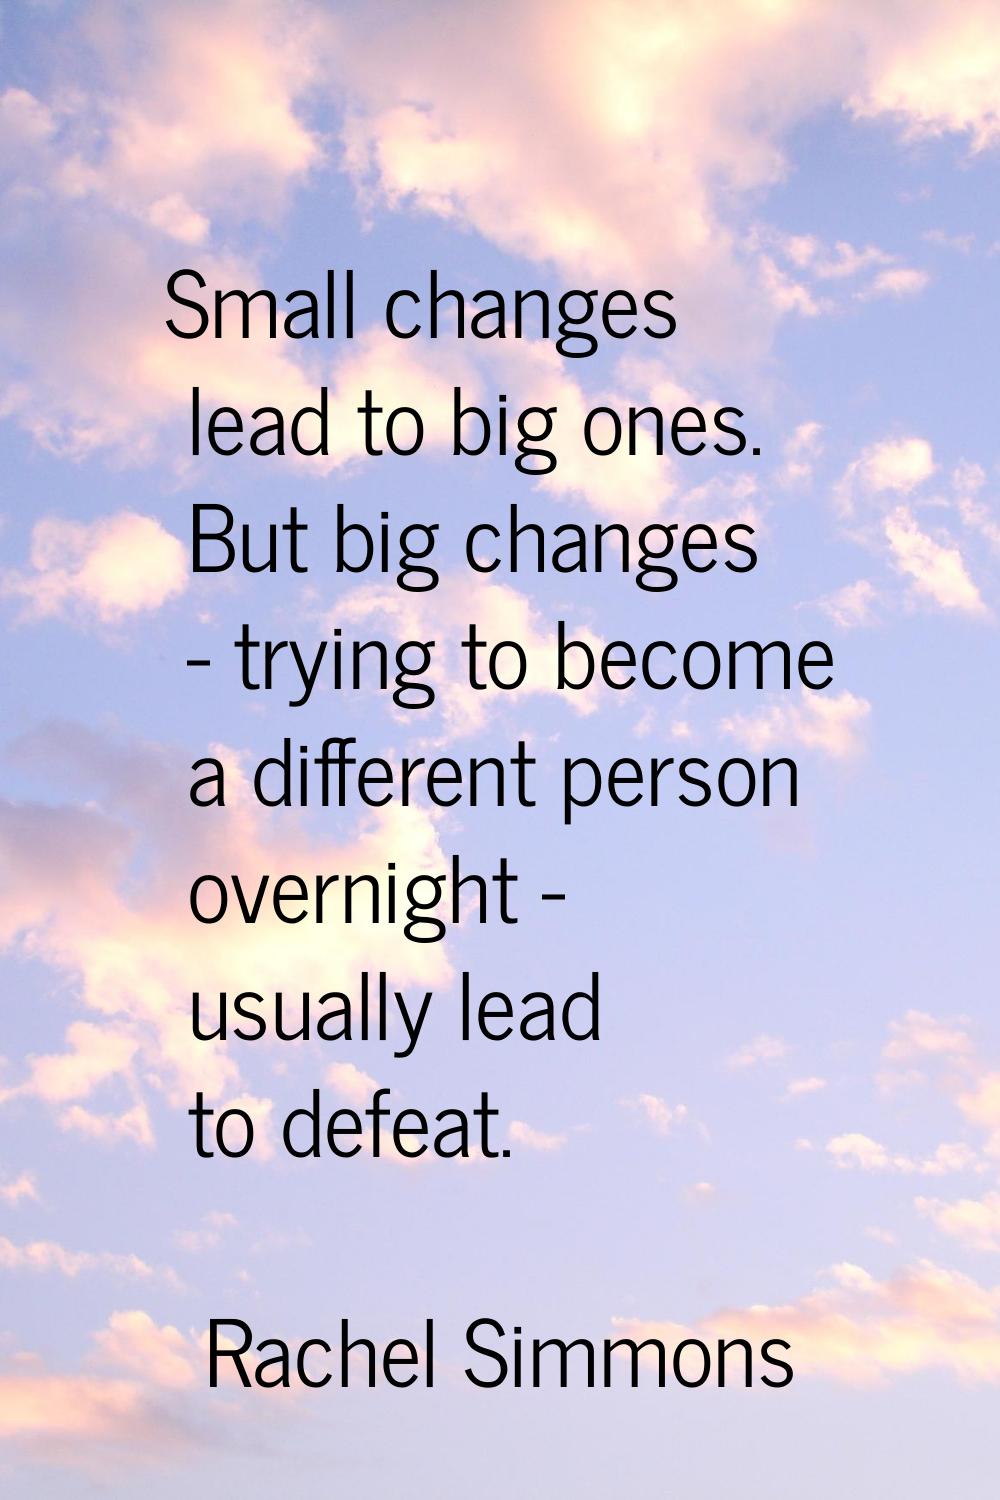 Small changes lead to big ones. But big changes - trying to become a different person overnight - u